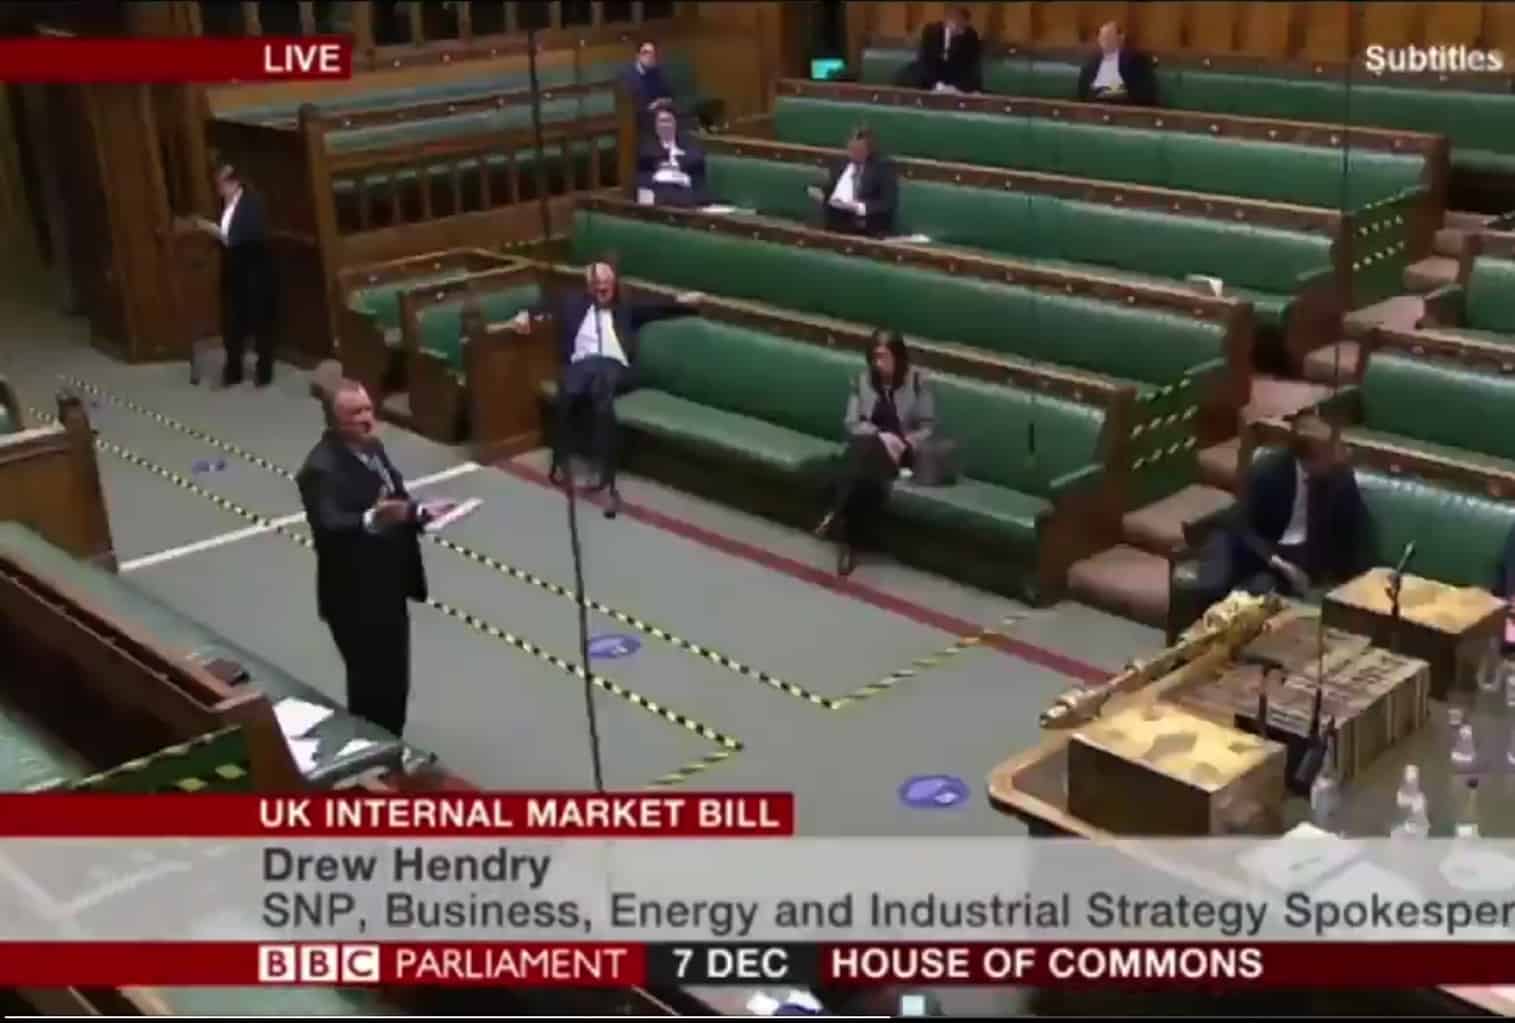 Watch: SNP MP brings the house down as he lampoons the Tories “casual relationship with the truth”